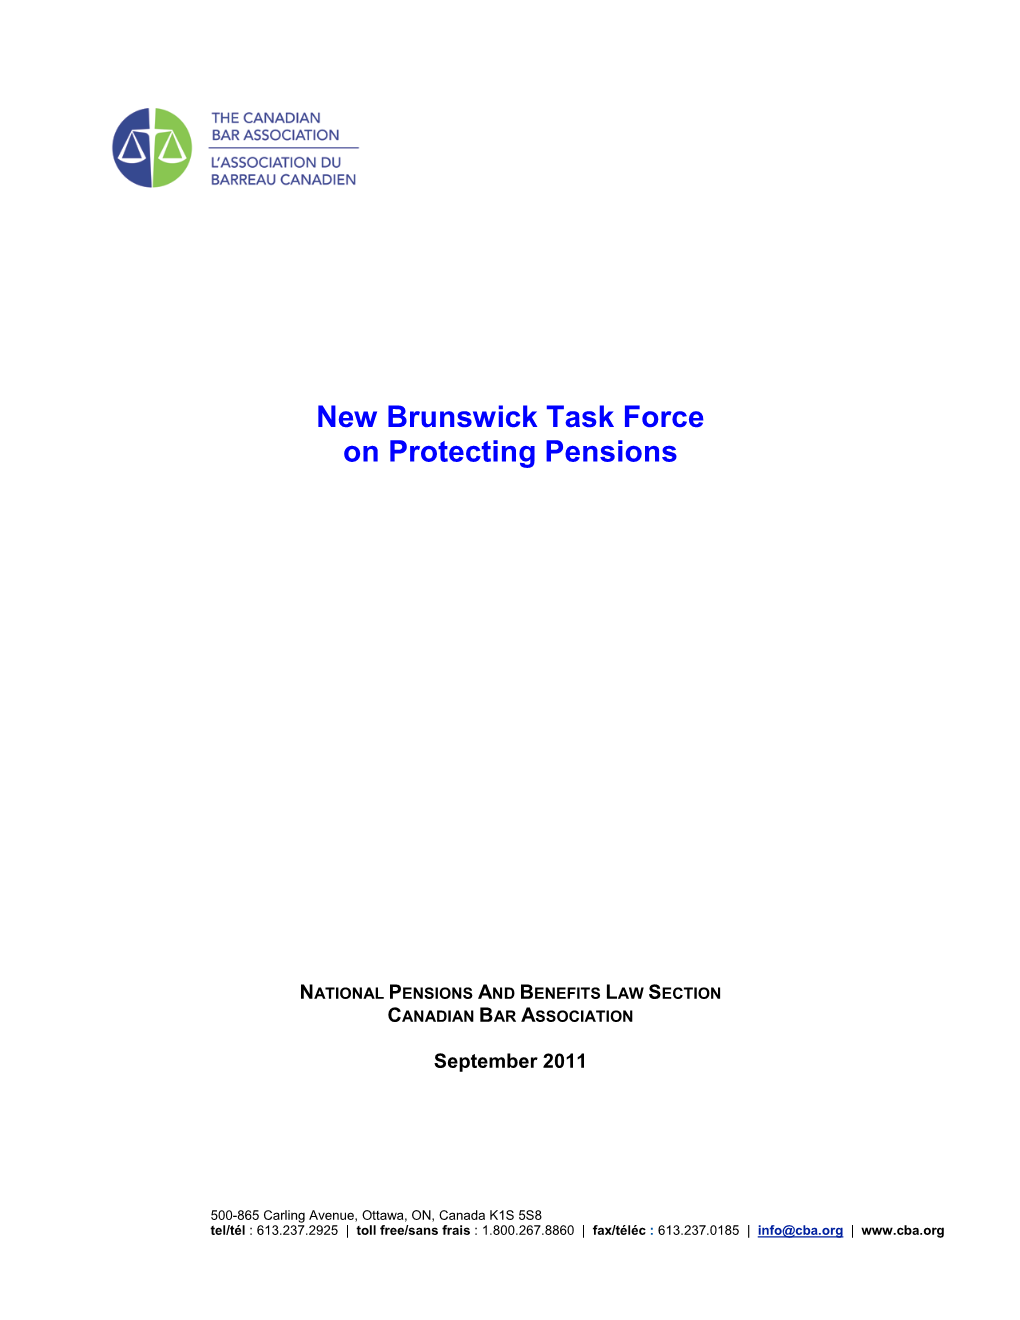 New Brunswick Task Force on Protecting Pensions